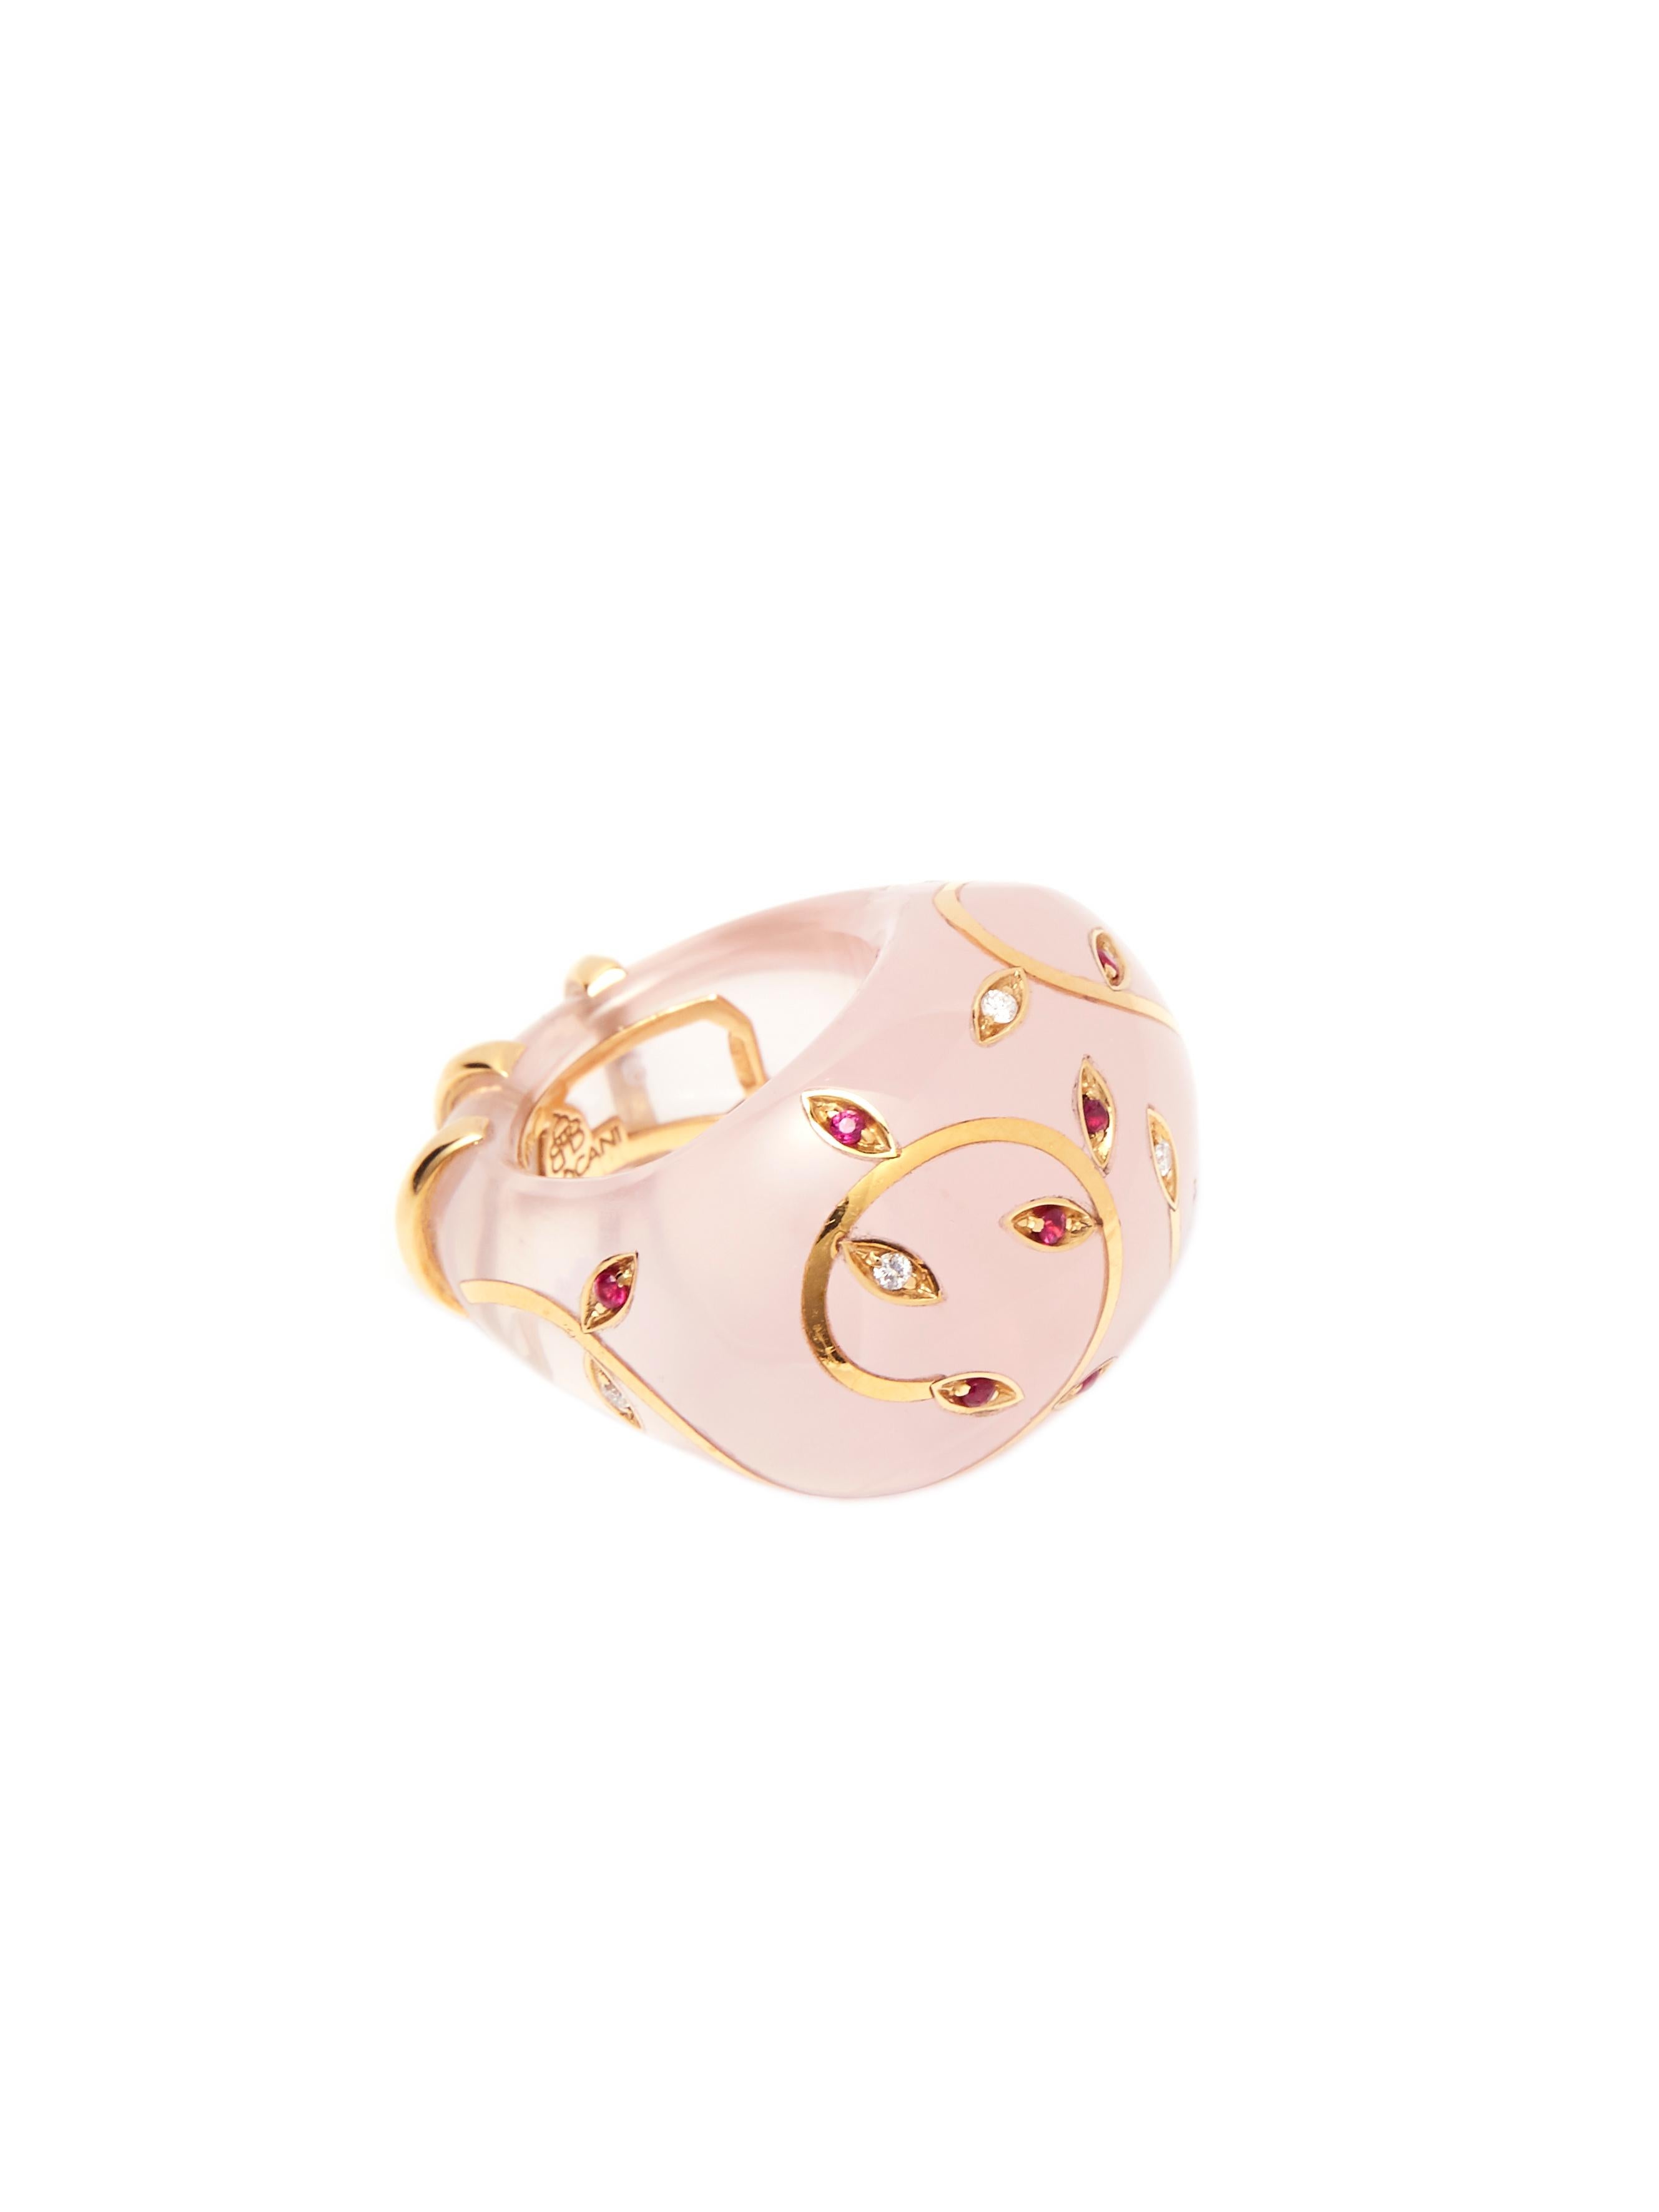 Ring sculpted in top quality rose quartz with floral decoration executed with high carat yellow gold inlay and set with faceted rubies and diamonds.

Admire the beauty and craftsmanship of this ring, a piece that is truly unique; you will not find